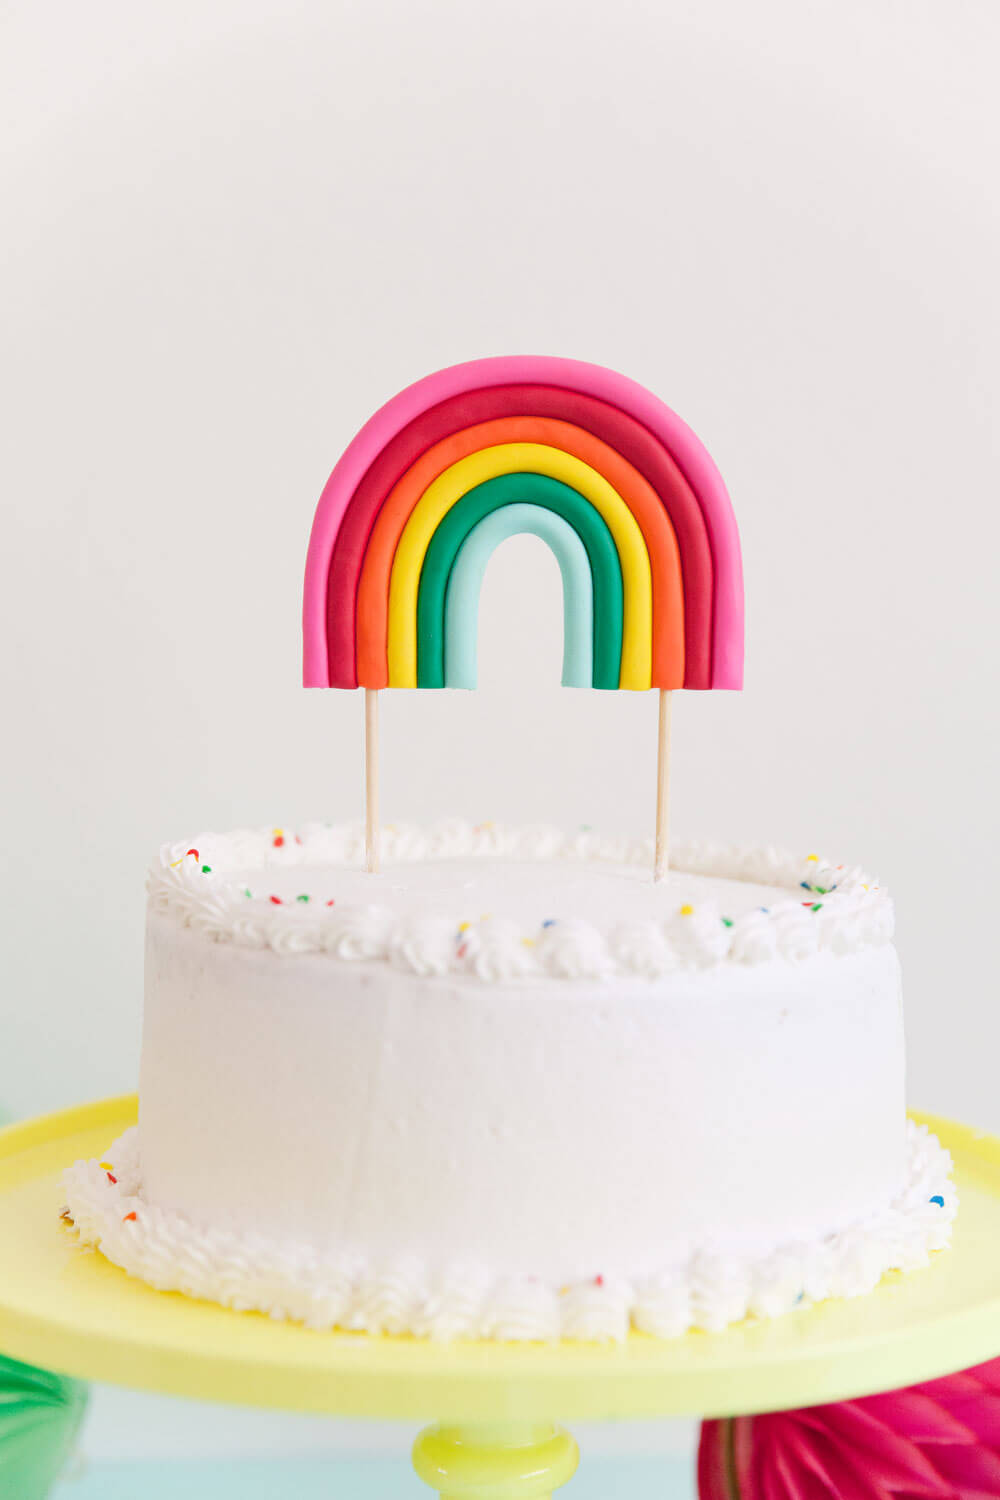 Easy-To-Make Beautiful Rainbow Cake-Topper Idea Using Clay Polymer Clay Ideas and Projects